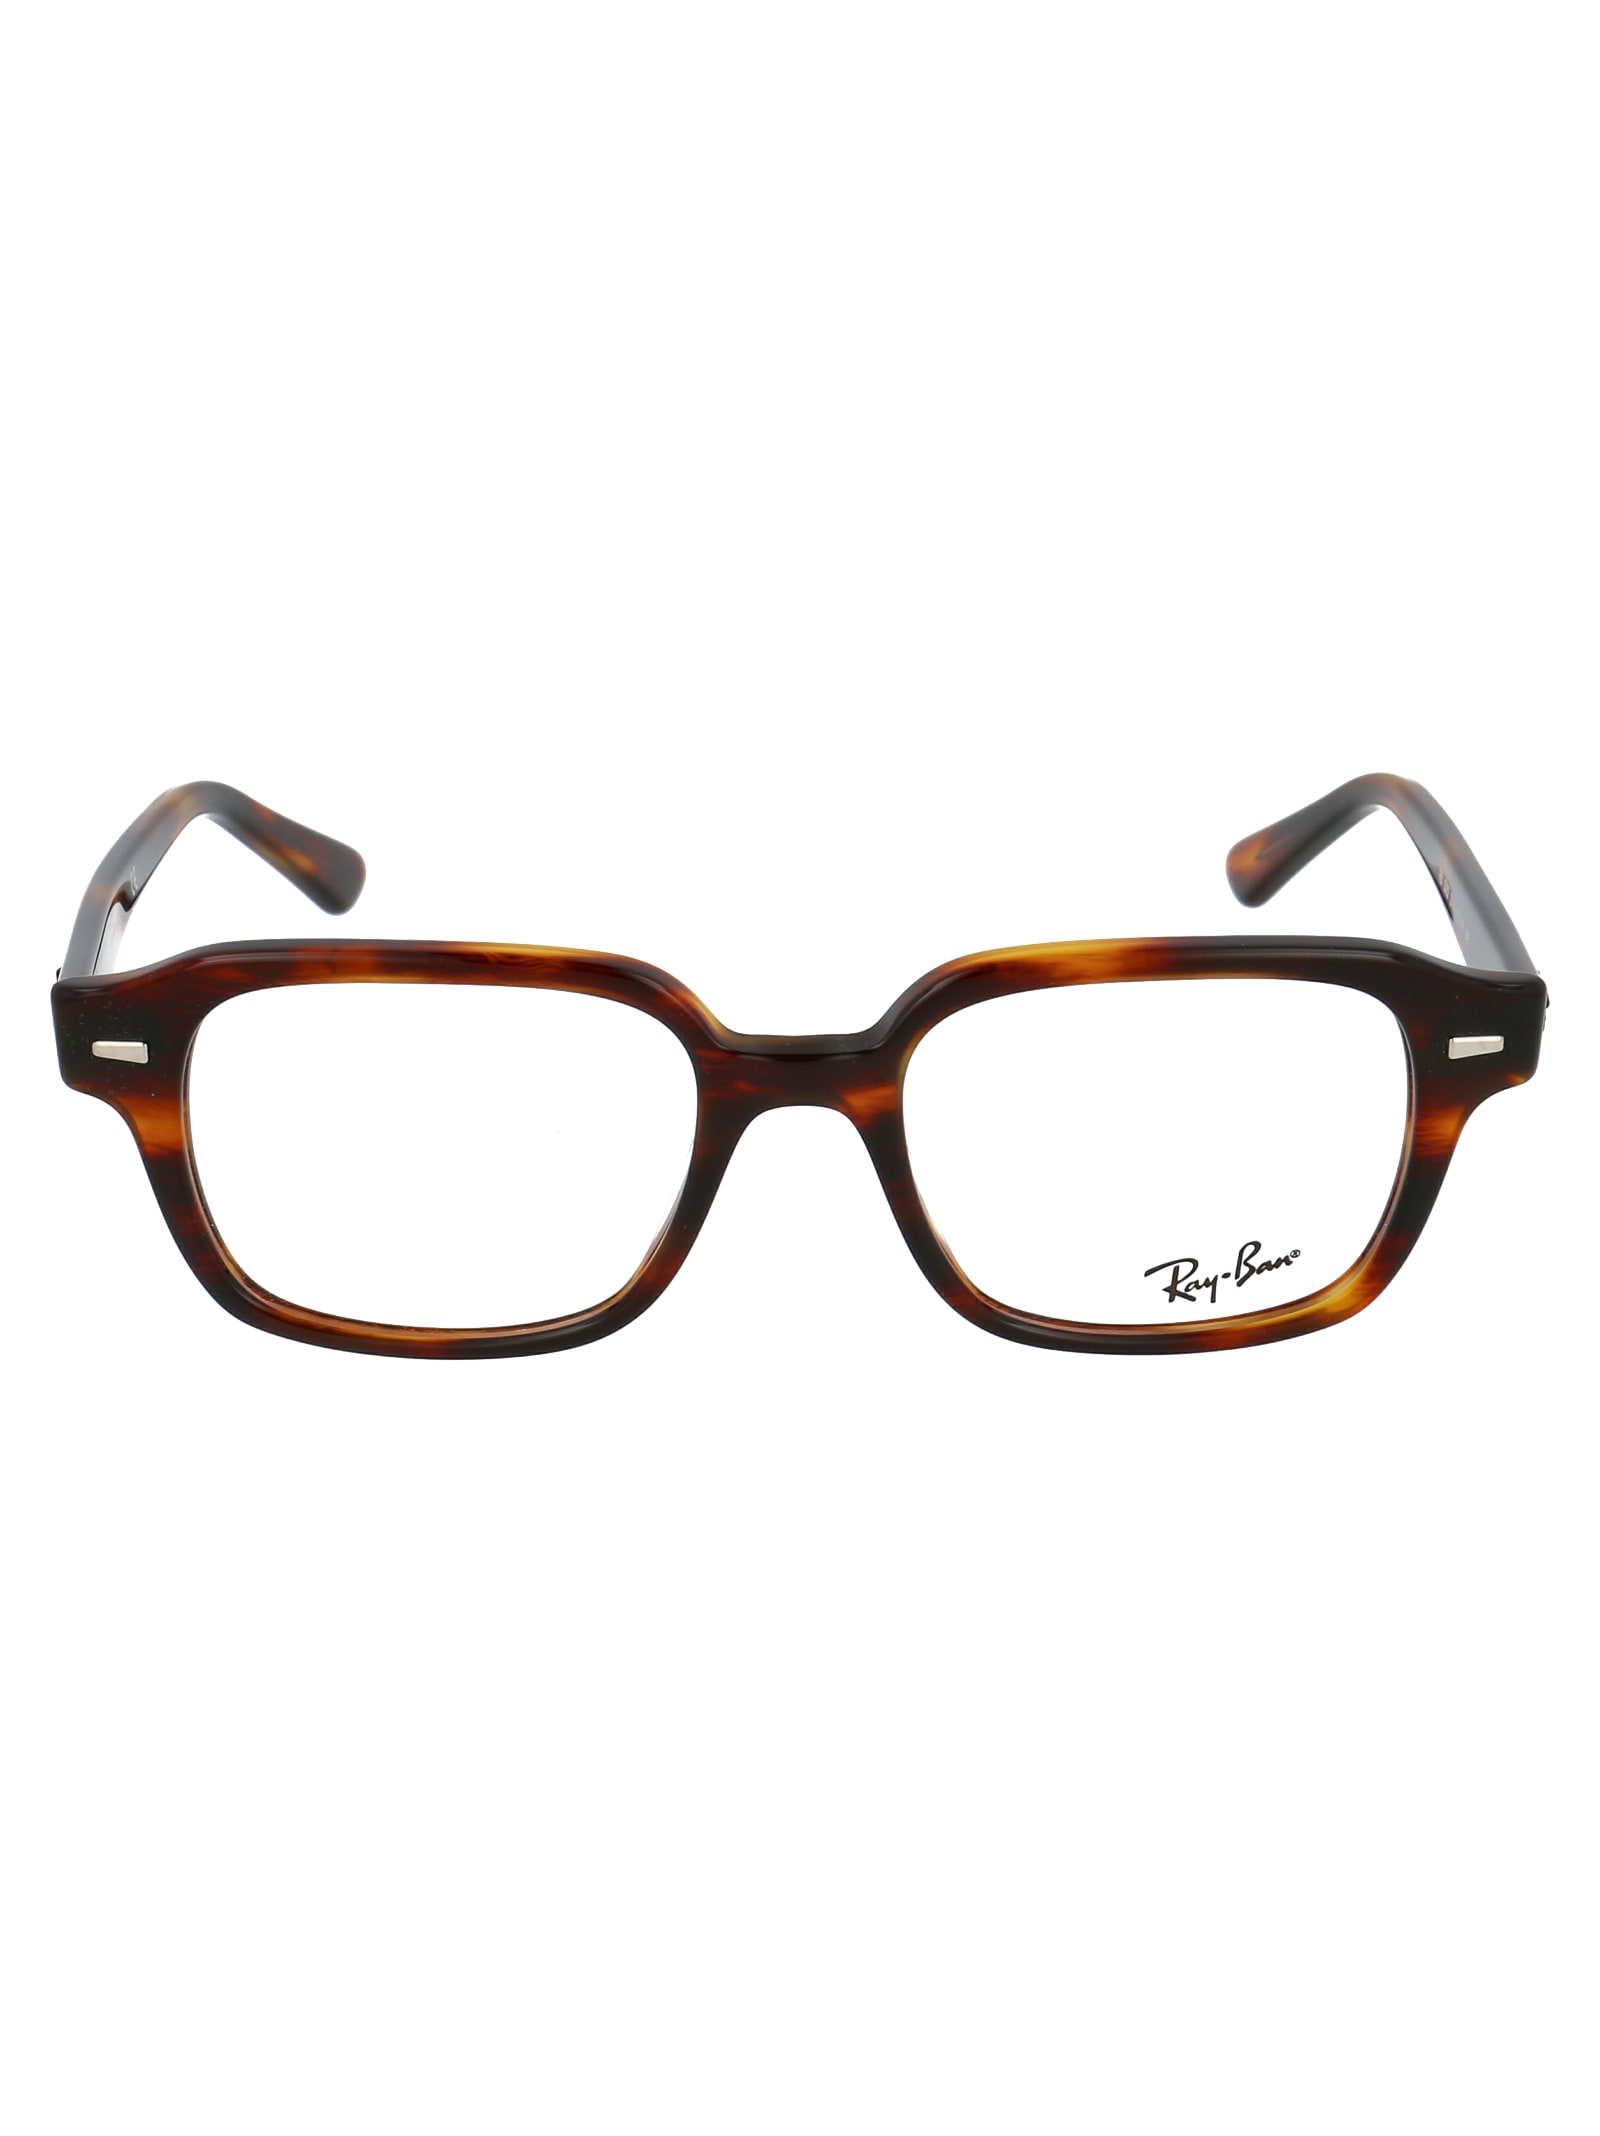 Ray Ban 0rx5382 Glasses In 2144 Striped Red Havana